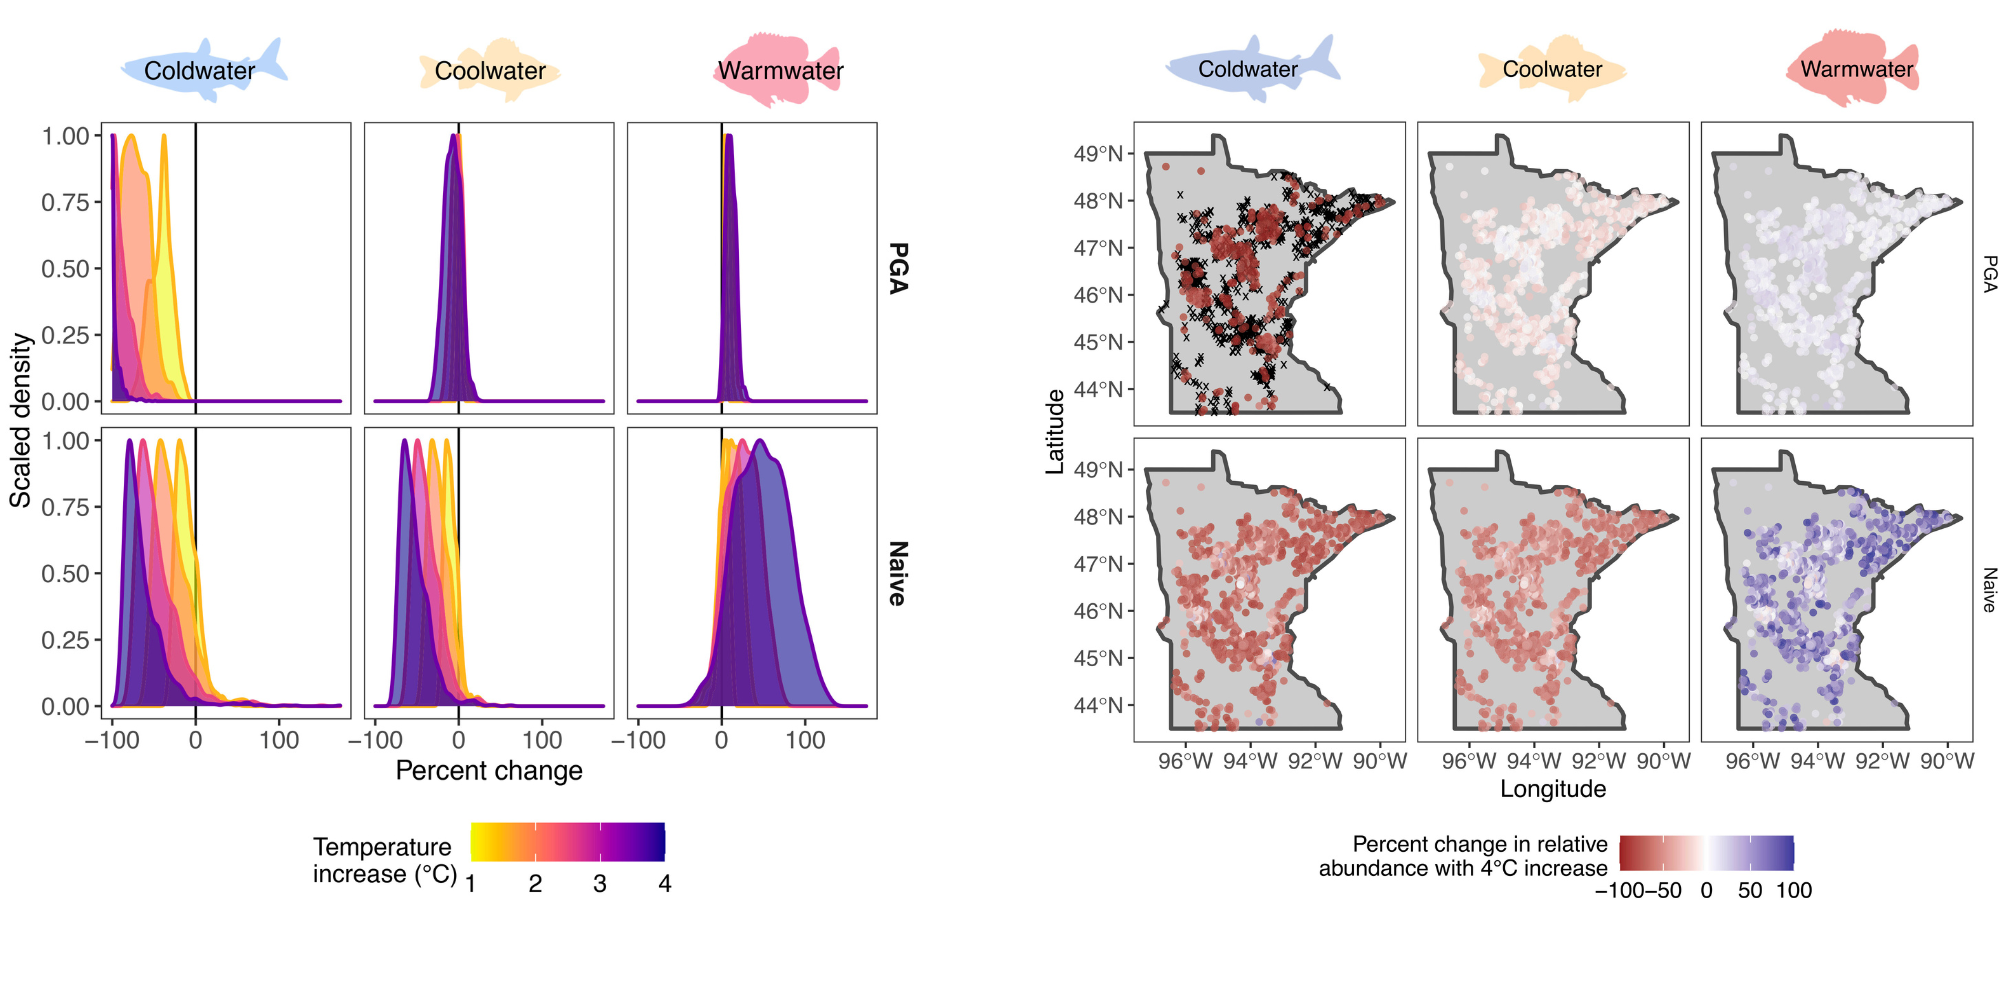 On left: graphs showing predicted percent change in relative abundance for fish species using the PGA and naive models for Minnesota lakes. On right: Mredicted percent change in relative abundance for fish species using the PGA and naive models.